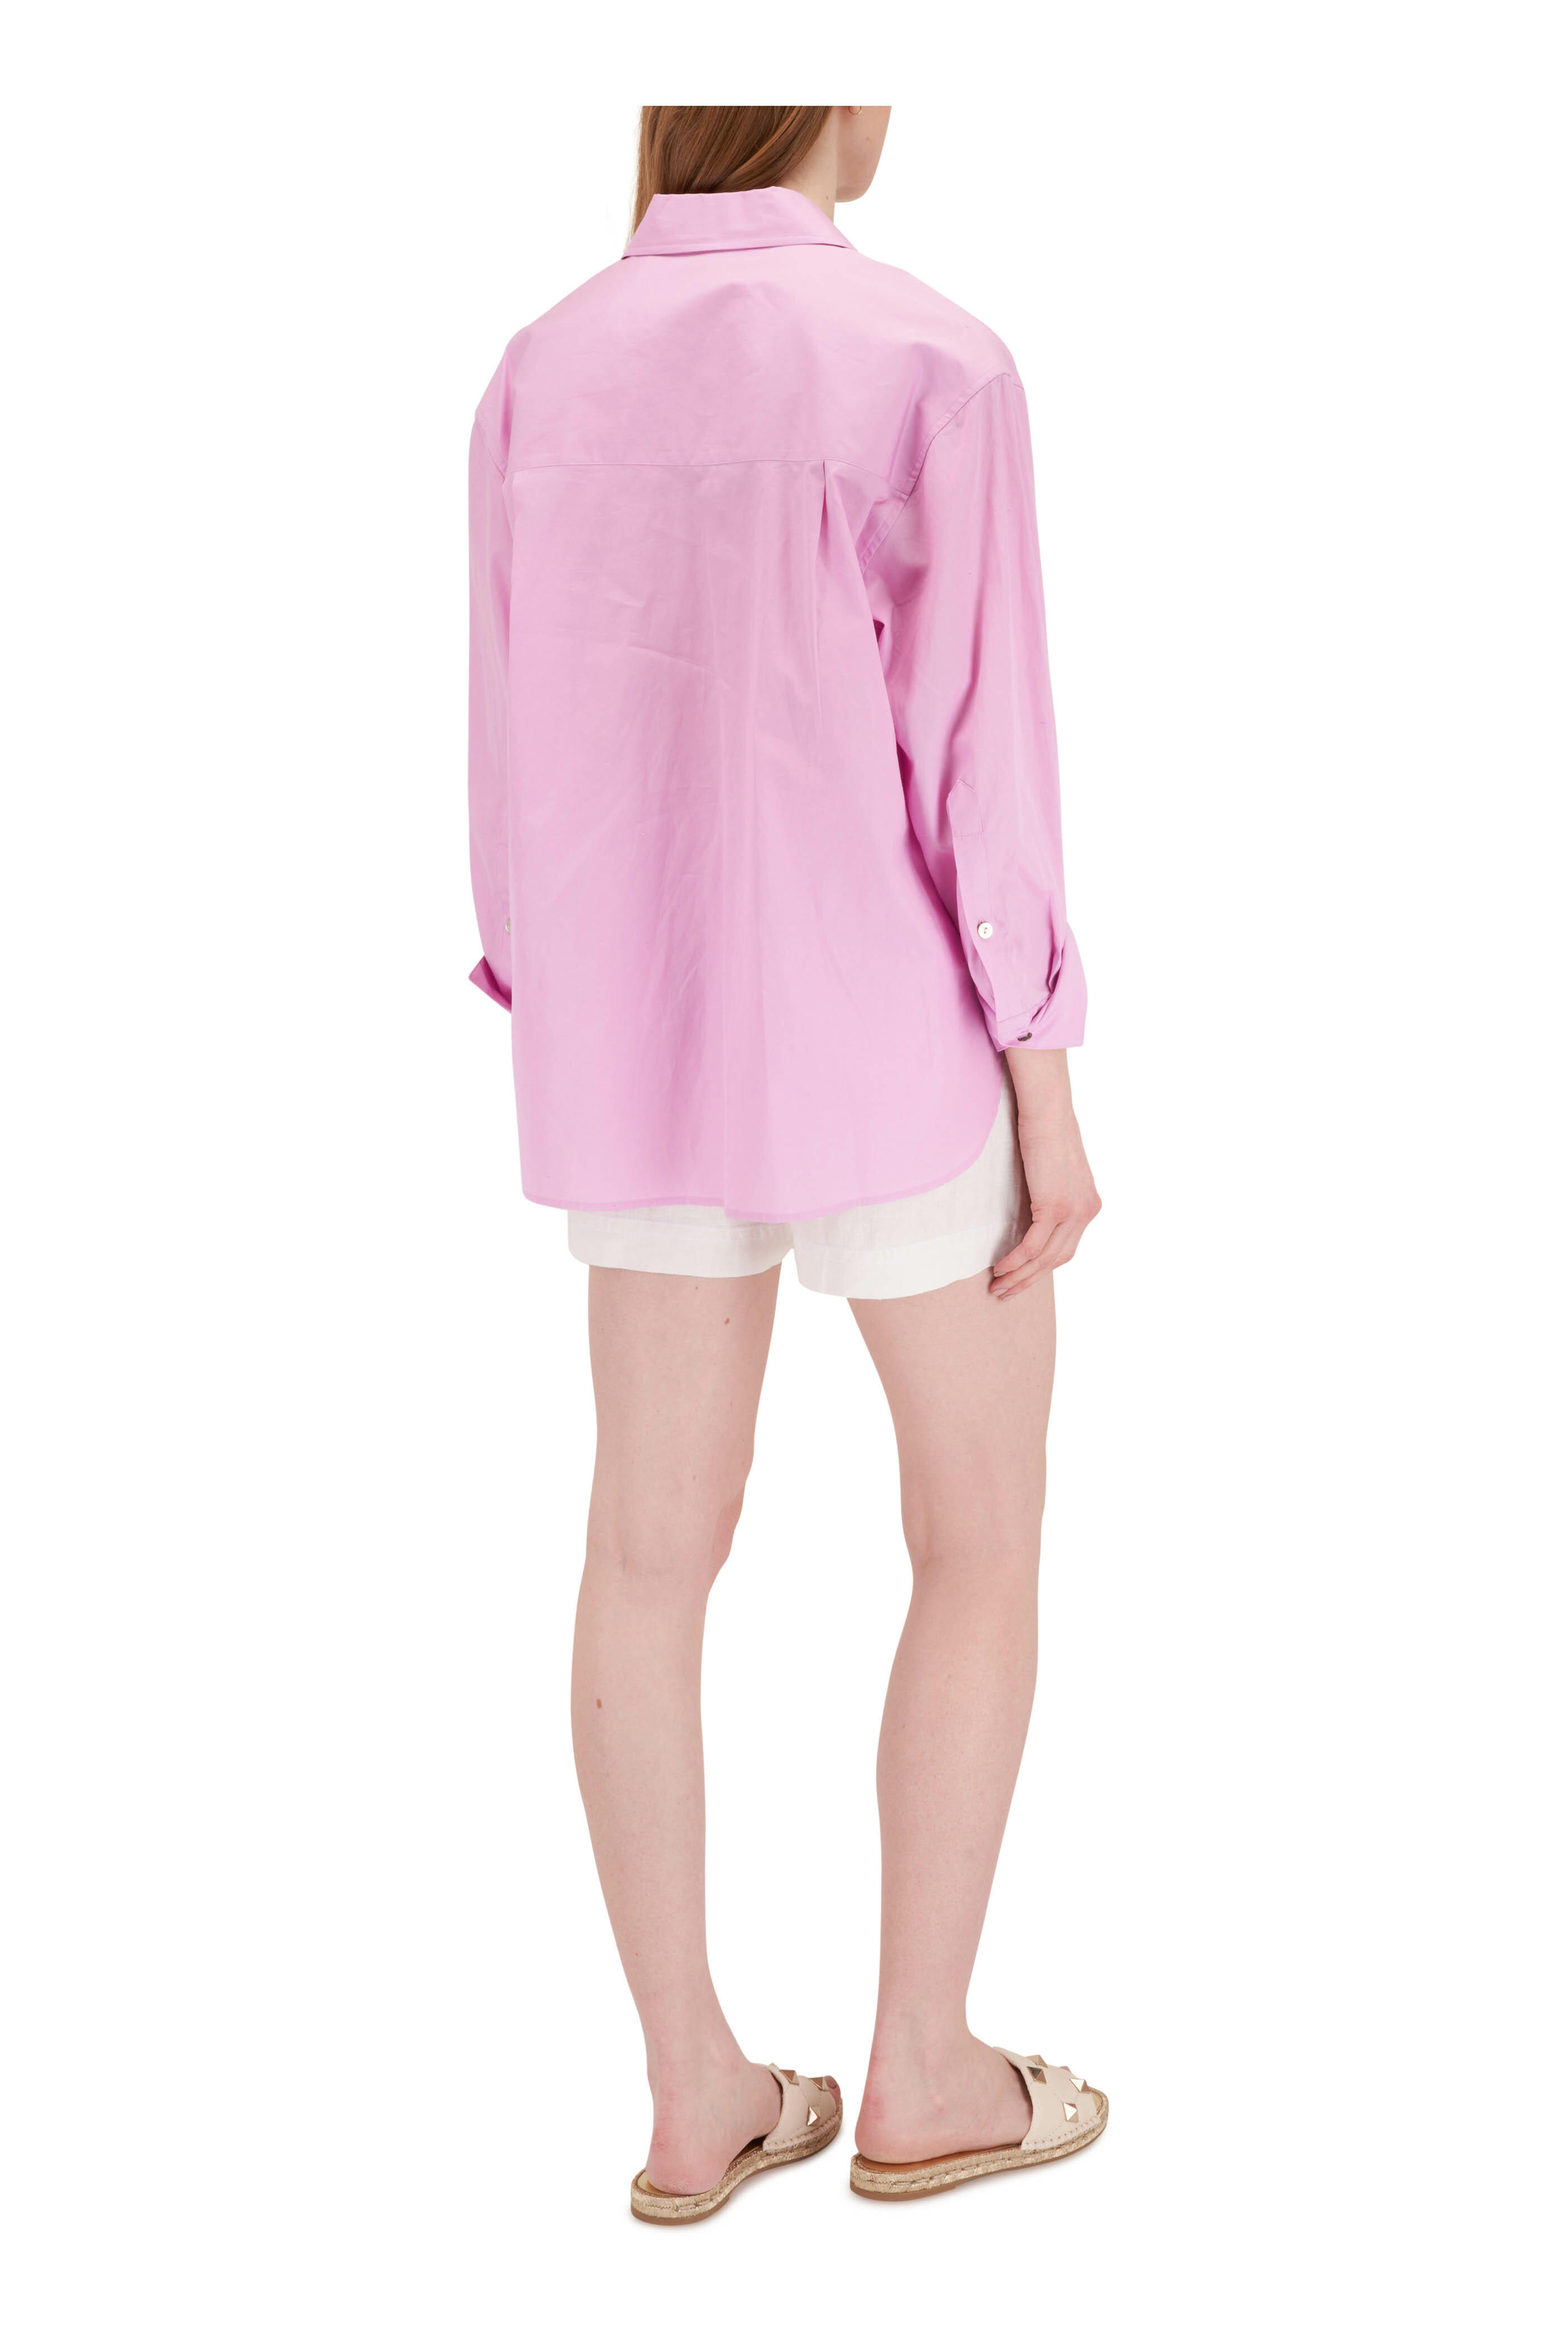 Vince - Rosea Oversized Long Sleeve Shirt | Mitchell Stores